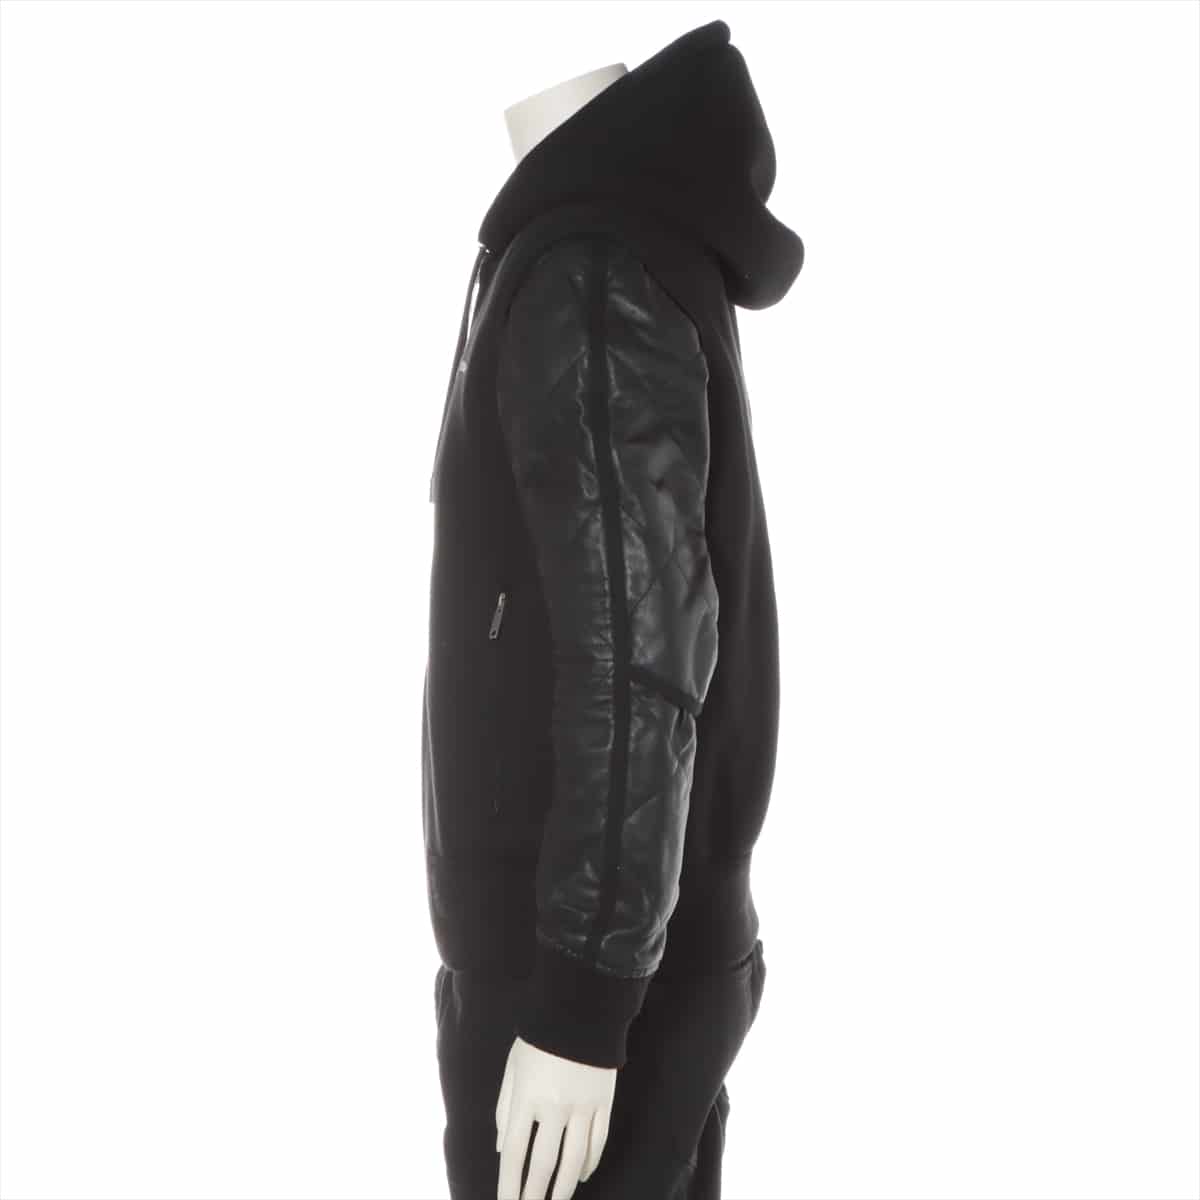 Givenchy Rayon Jacket 46 Men's Black  leather switchable hoodie